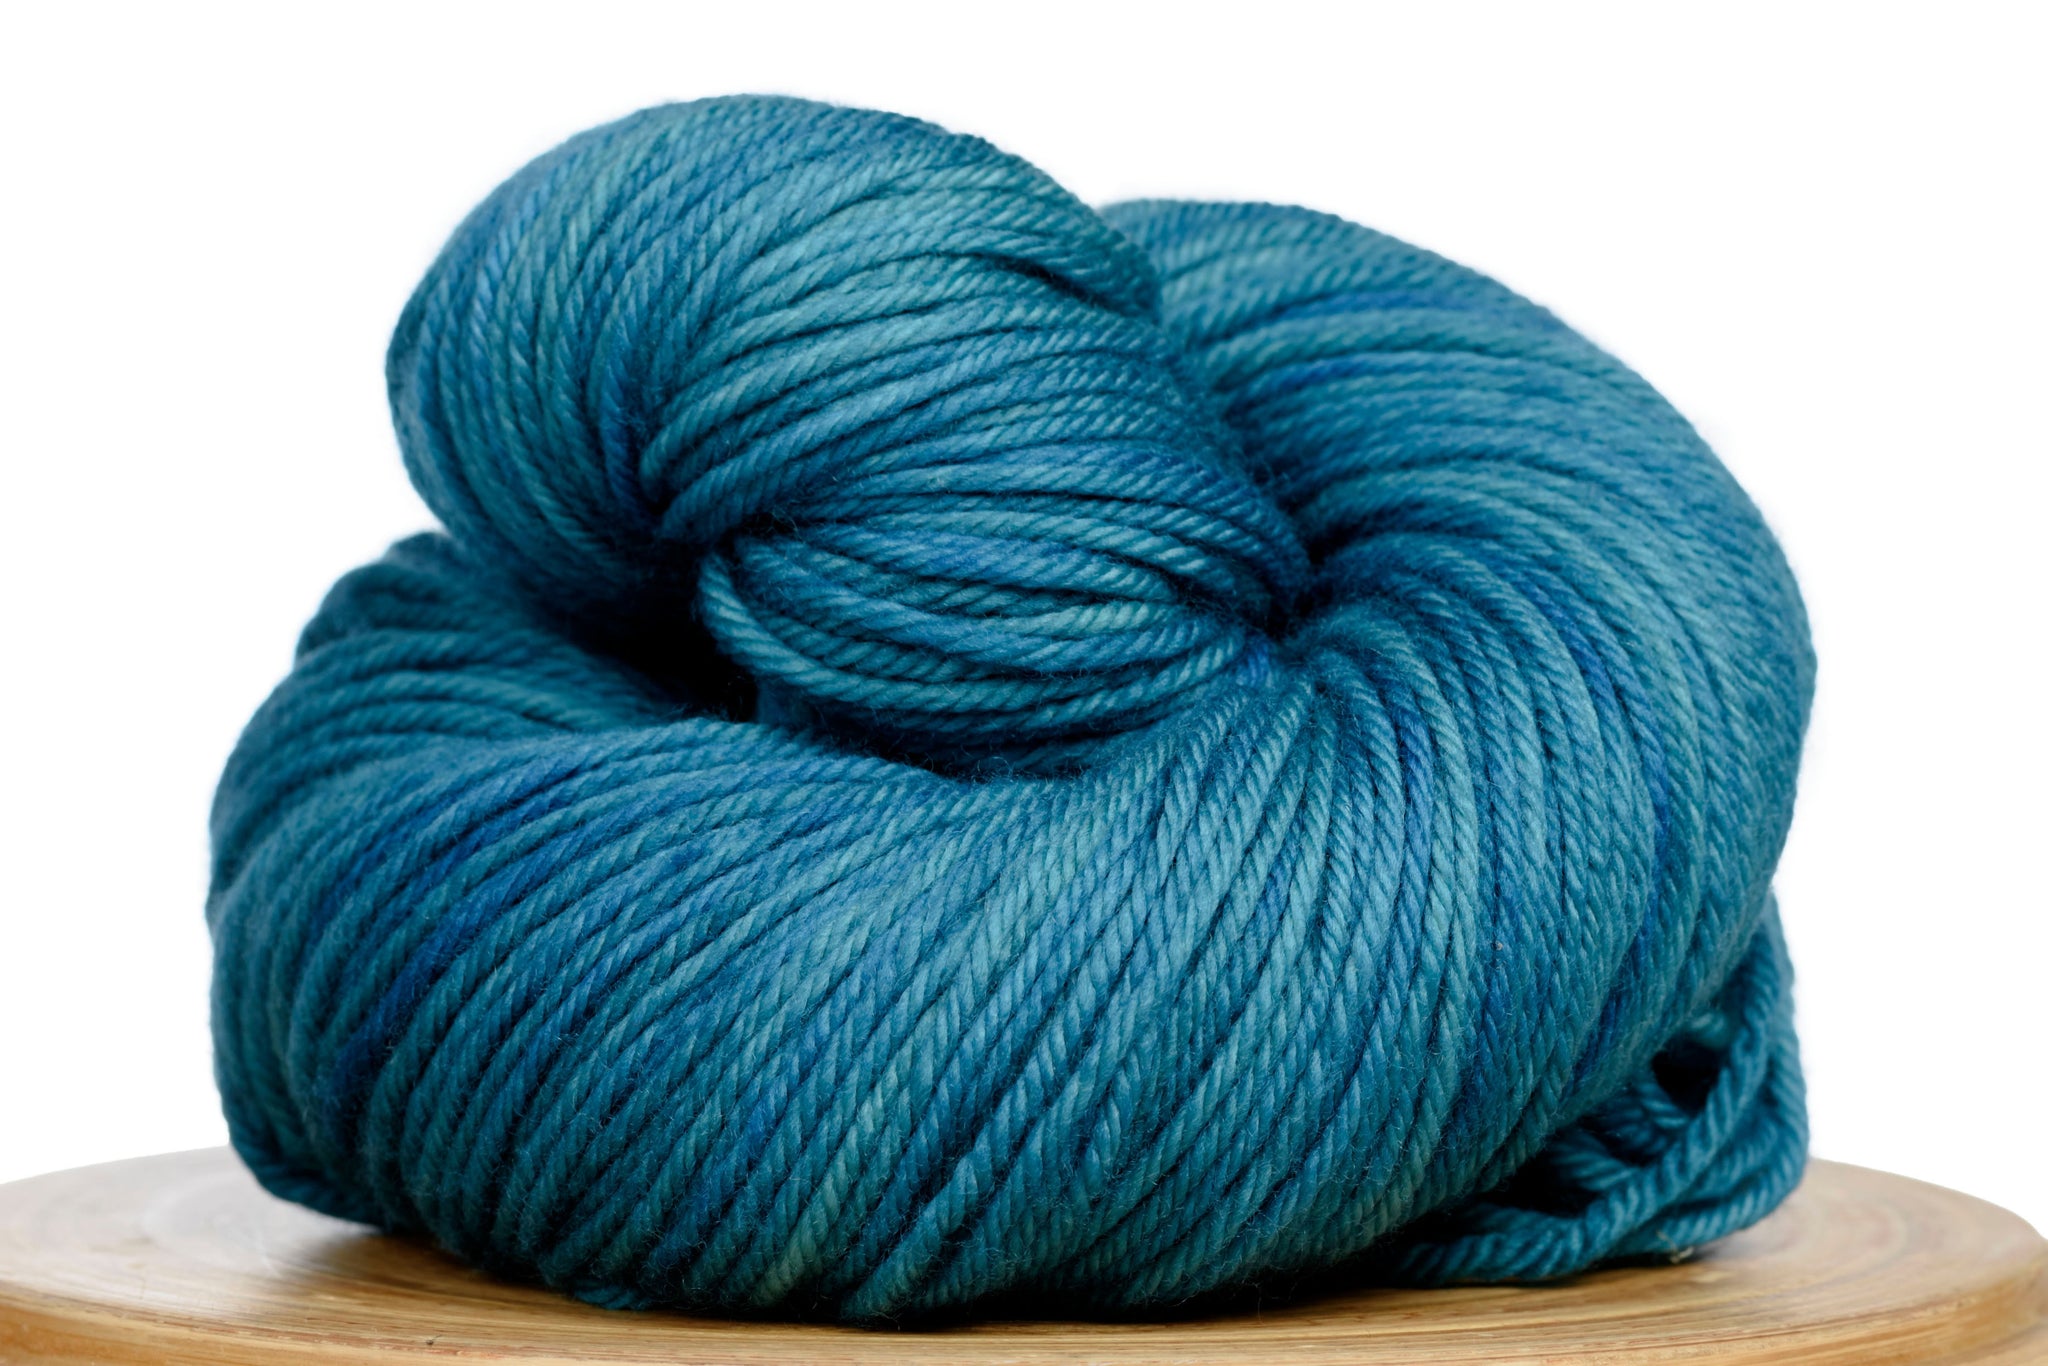 Andante hand-dyed worsted weight merino in Georgian Bay